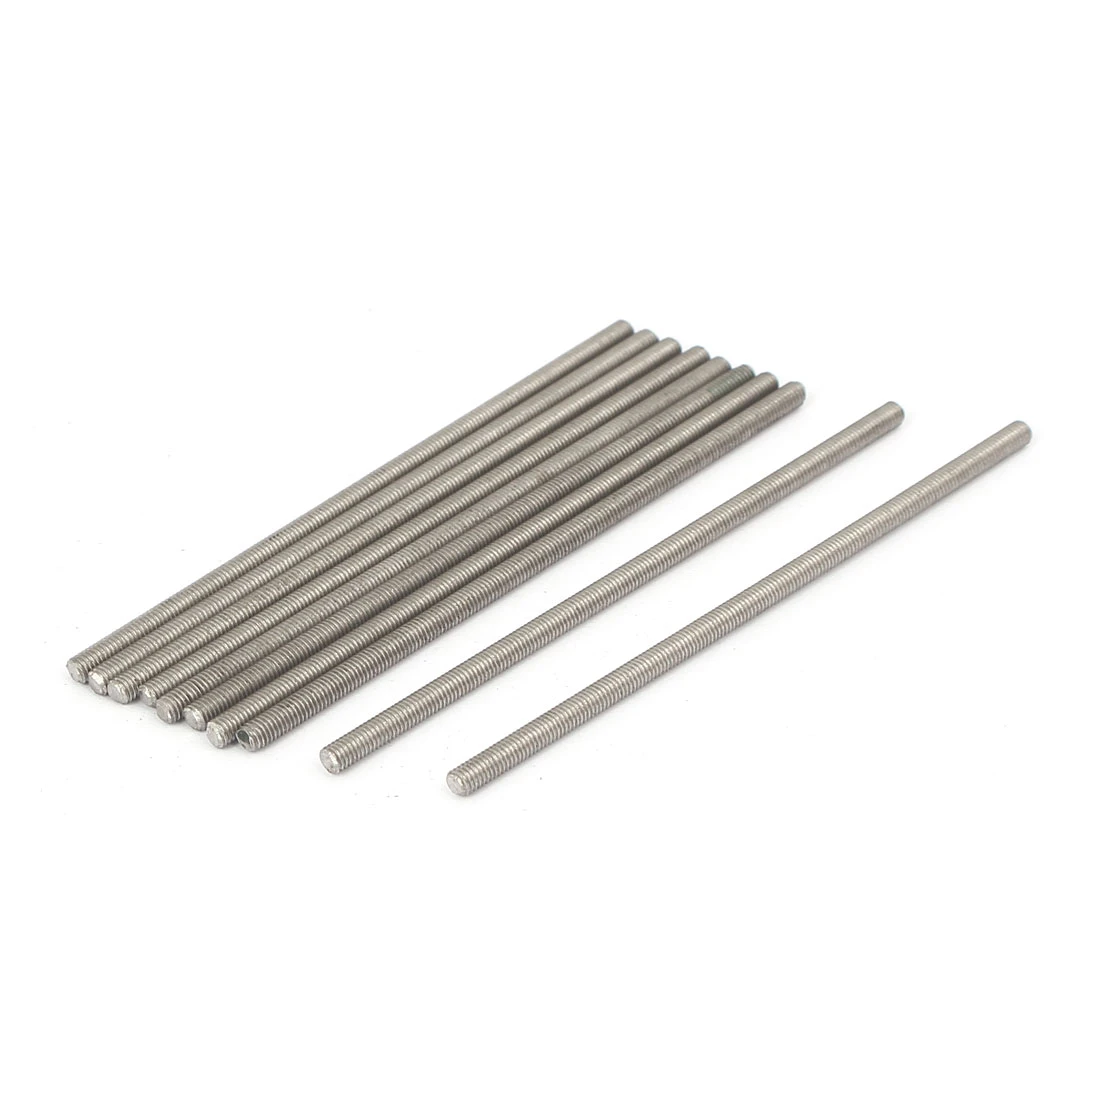 uxcell M4 x 80mm 304 Stainless Steel Fully Threaded Rod Bar Studs Silver Tone 20 Pcs a16071500ux0068 